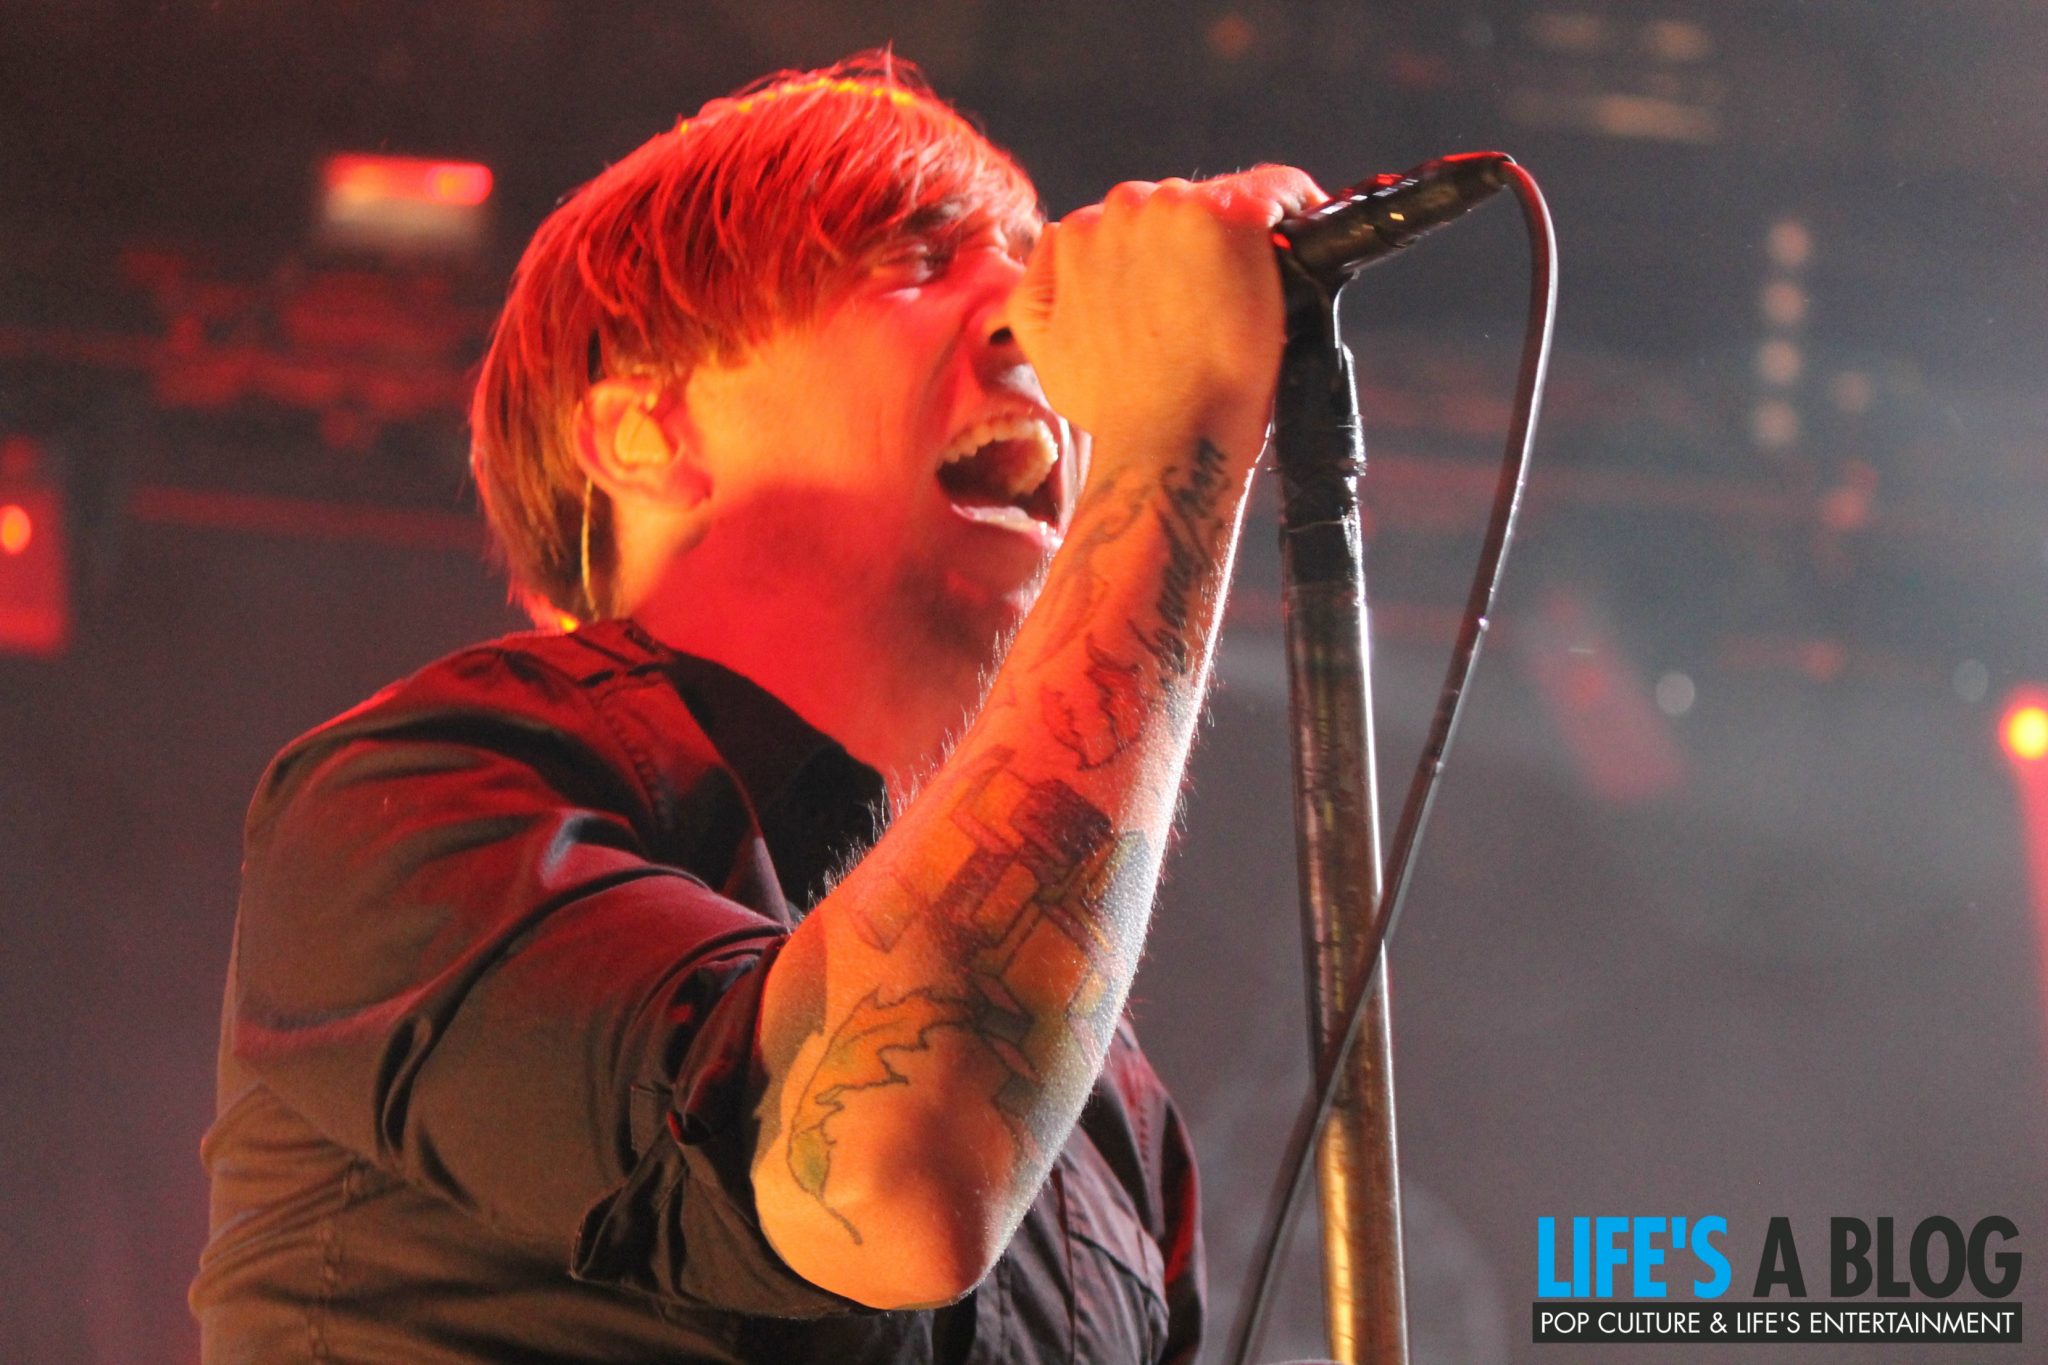 Billy Talent Dead Silence Tour at the Kitchener Auditorium